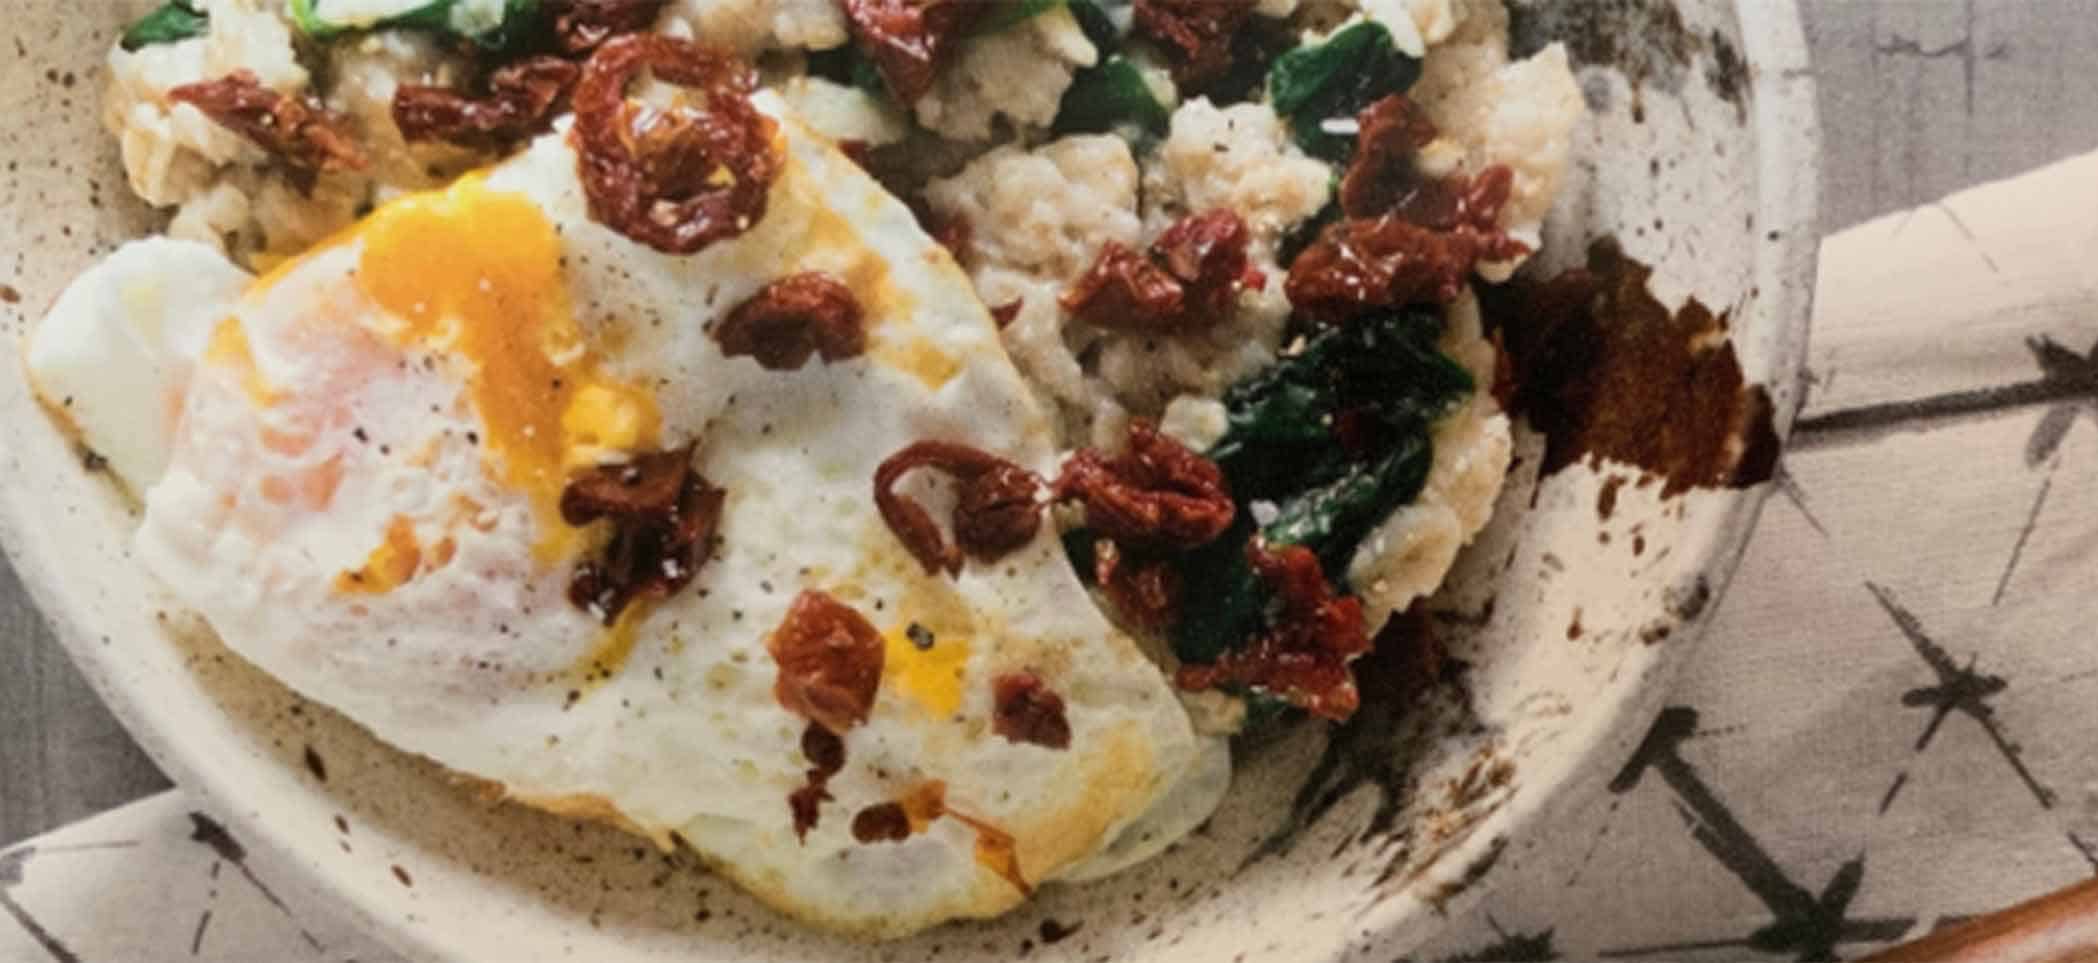 savory oatmeal with an egg on top